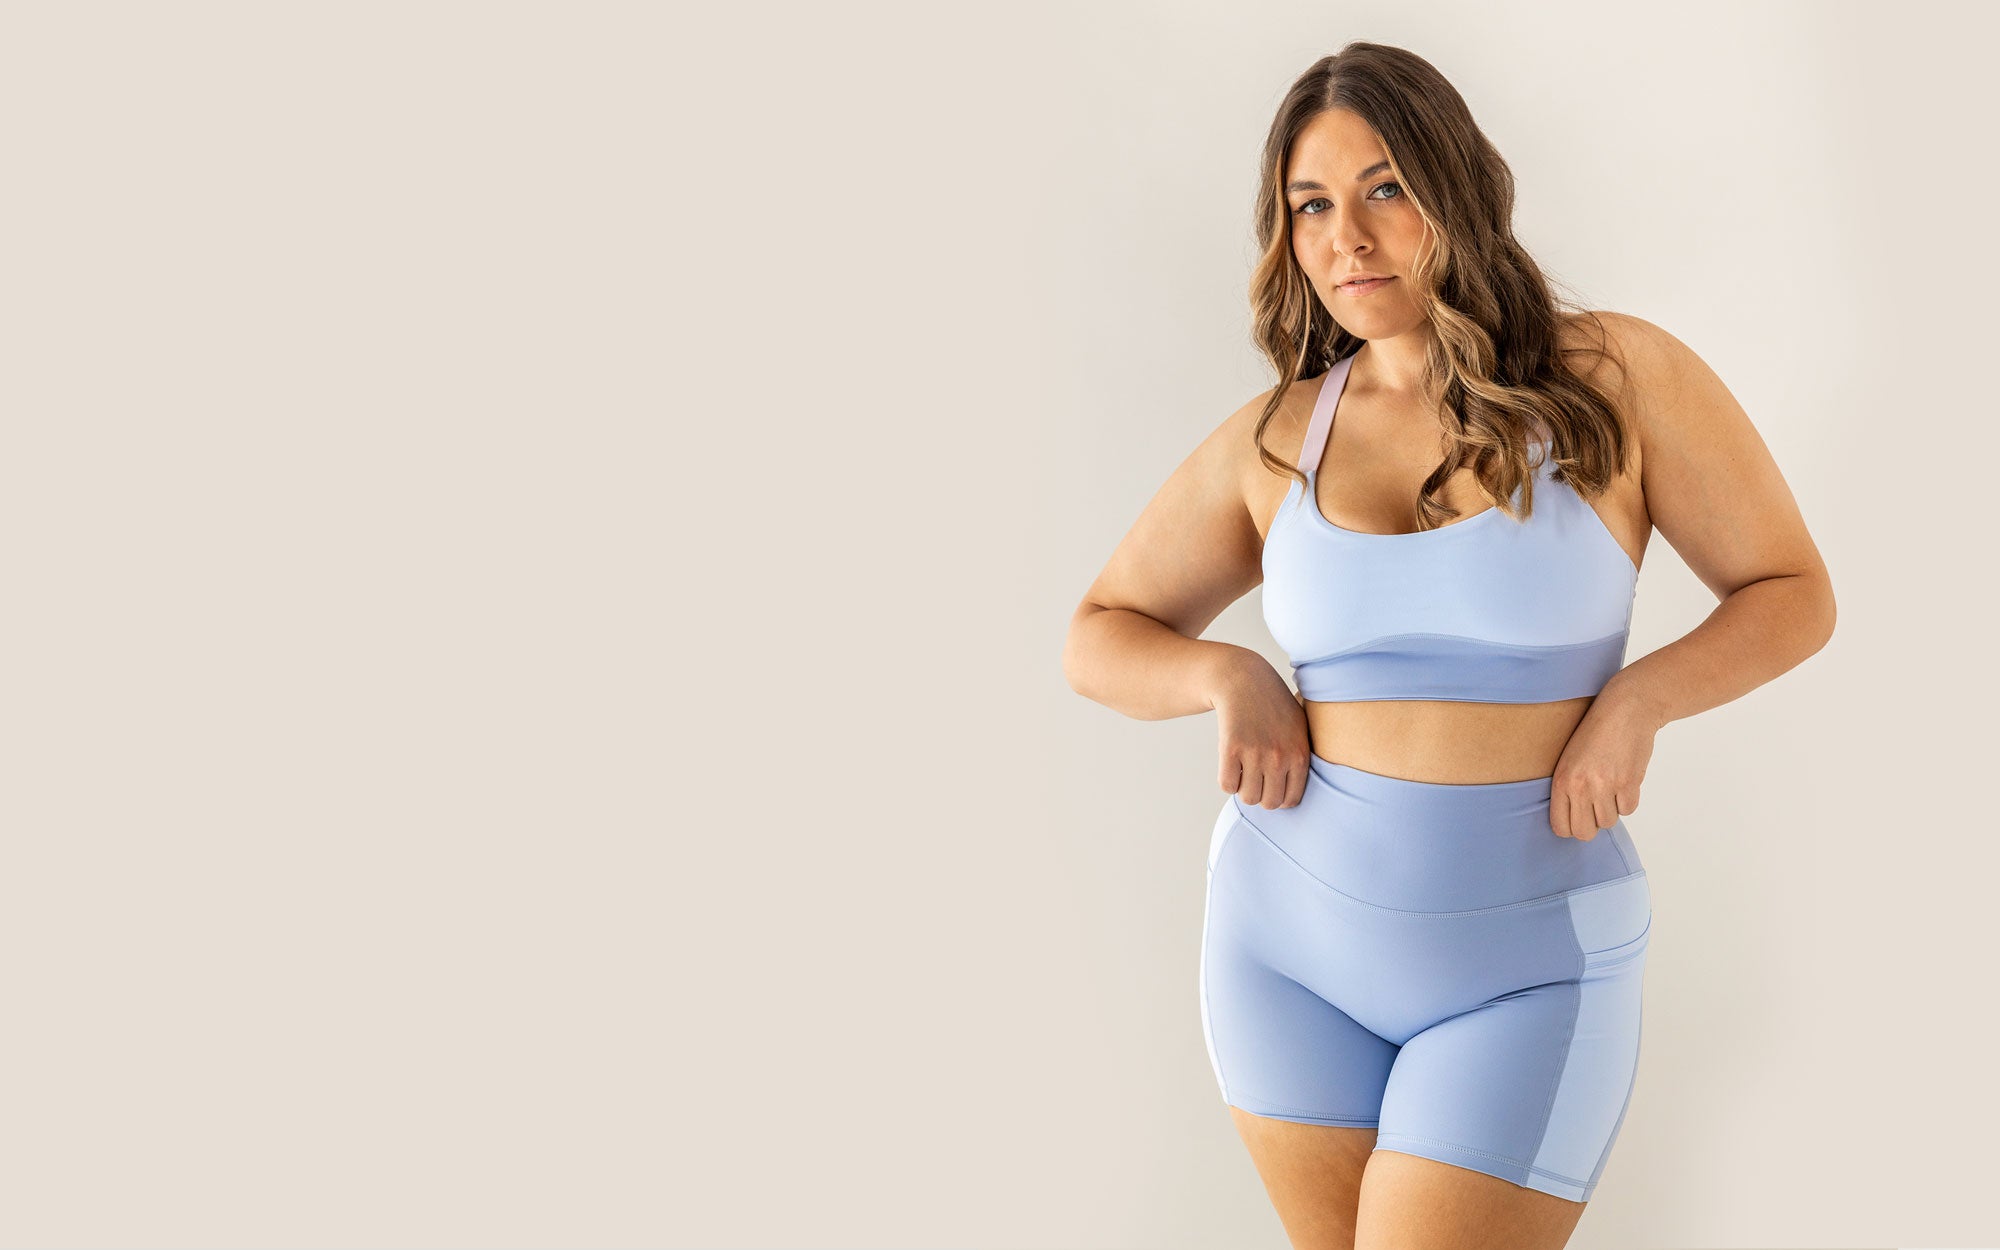 A curvy Earthletica Model wearing the Cascade Crop & Crystal Clear Pocket Set. She is looking directly at the camera, standing with her legs slightly crossed and her hands on the waistband of the shorts.